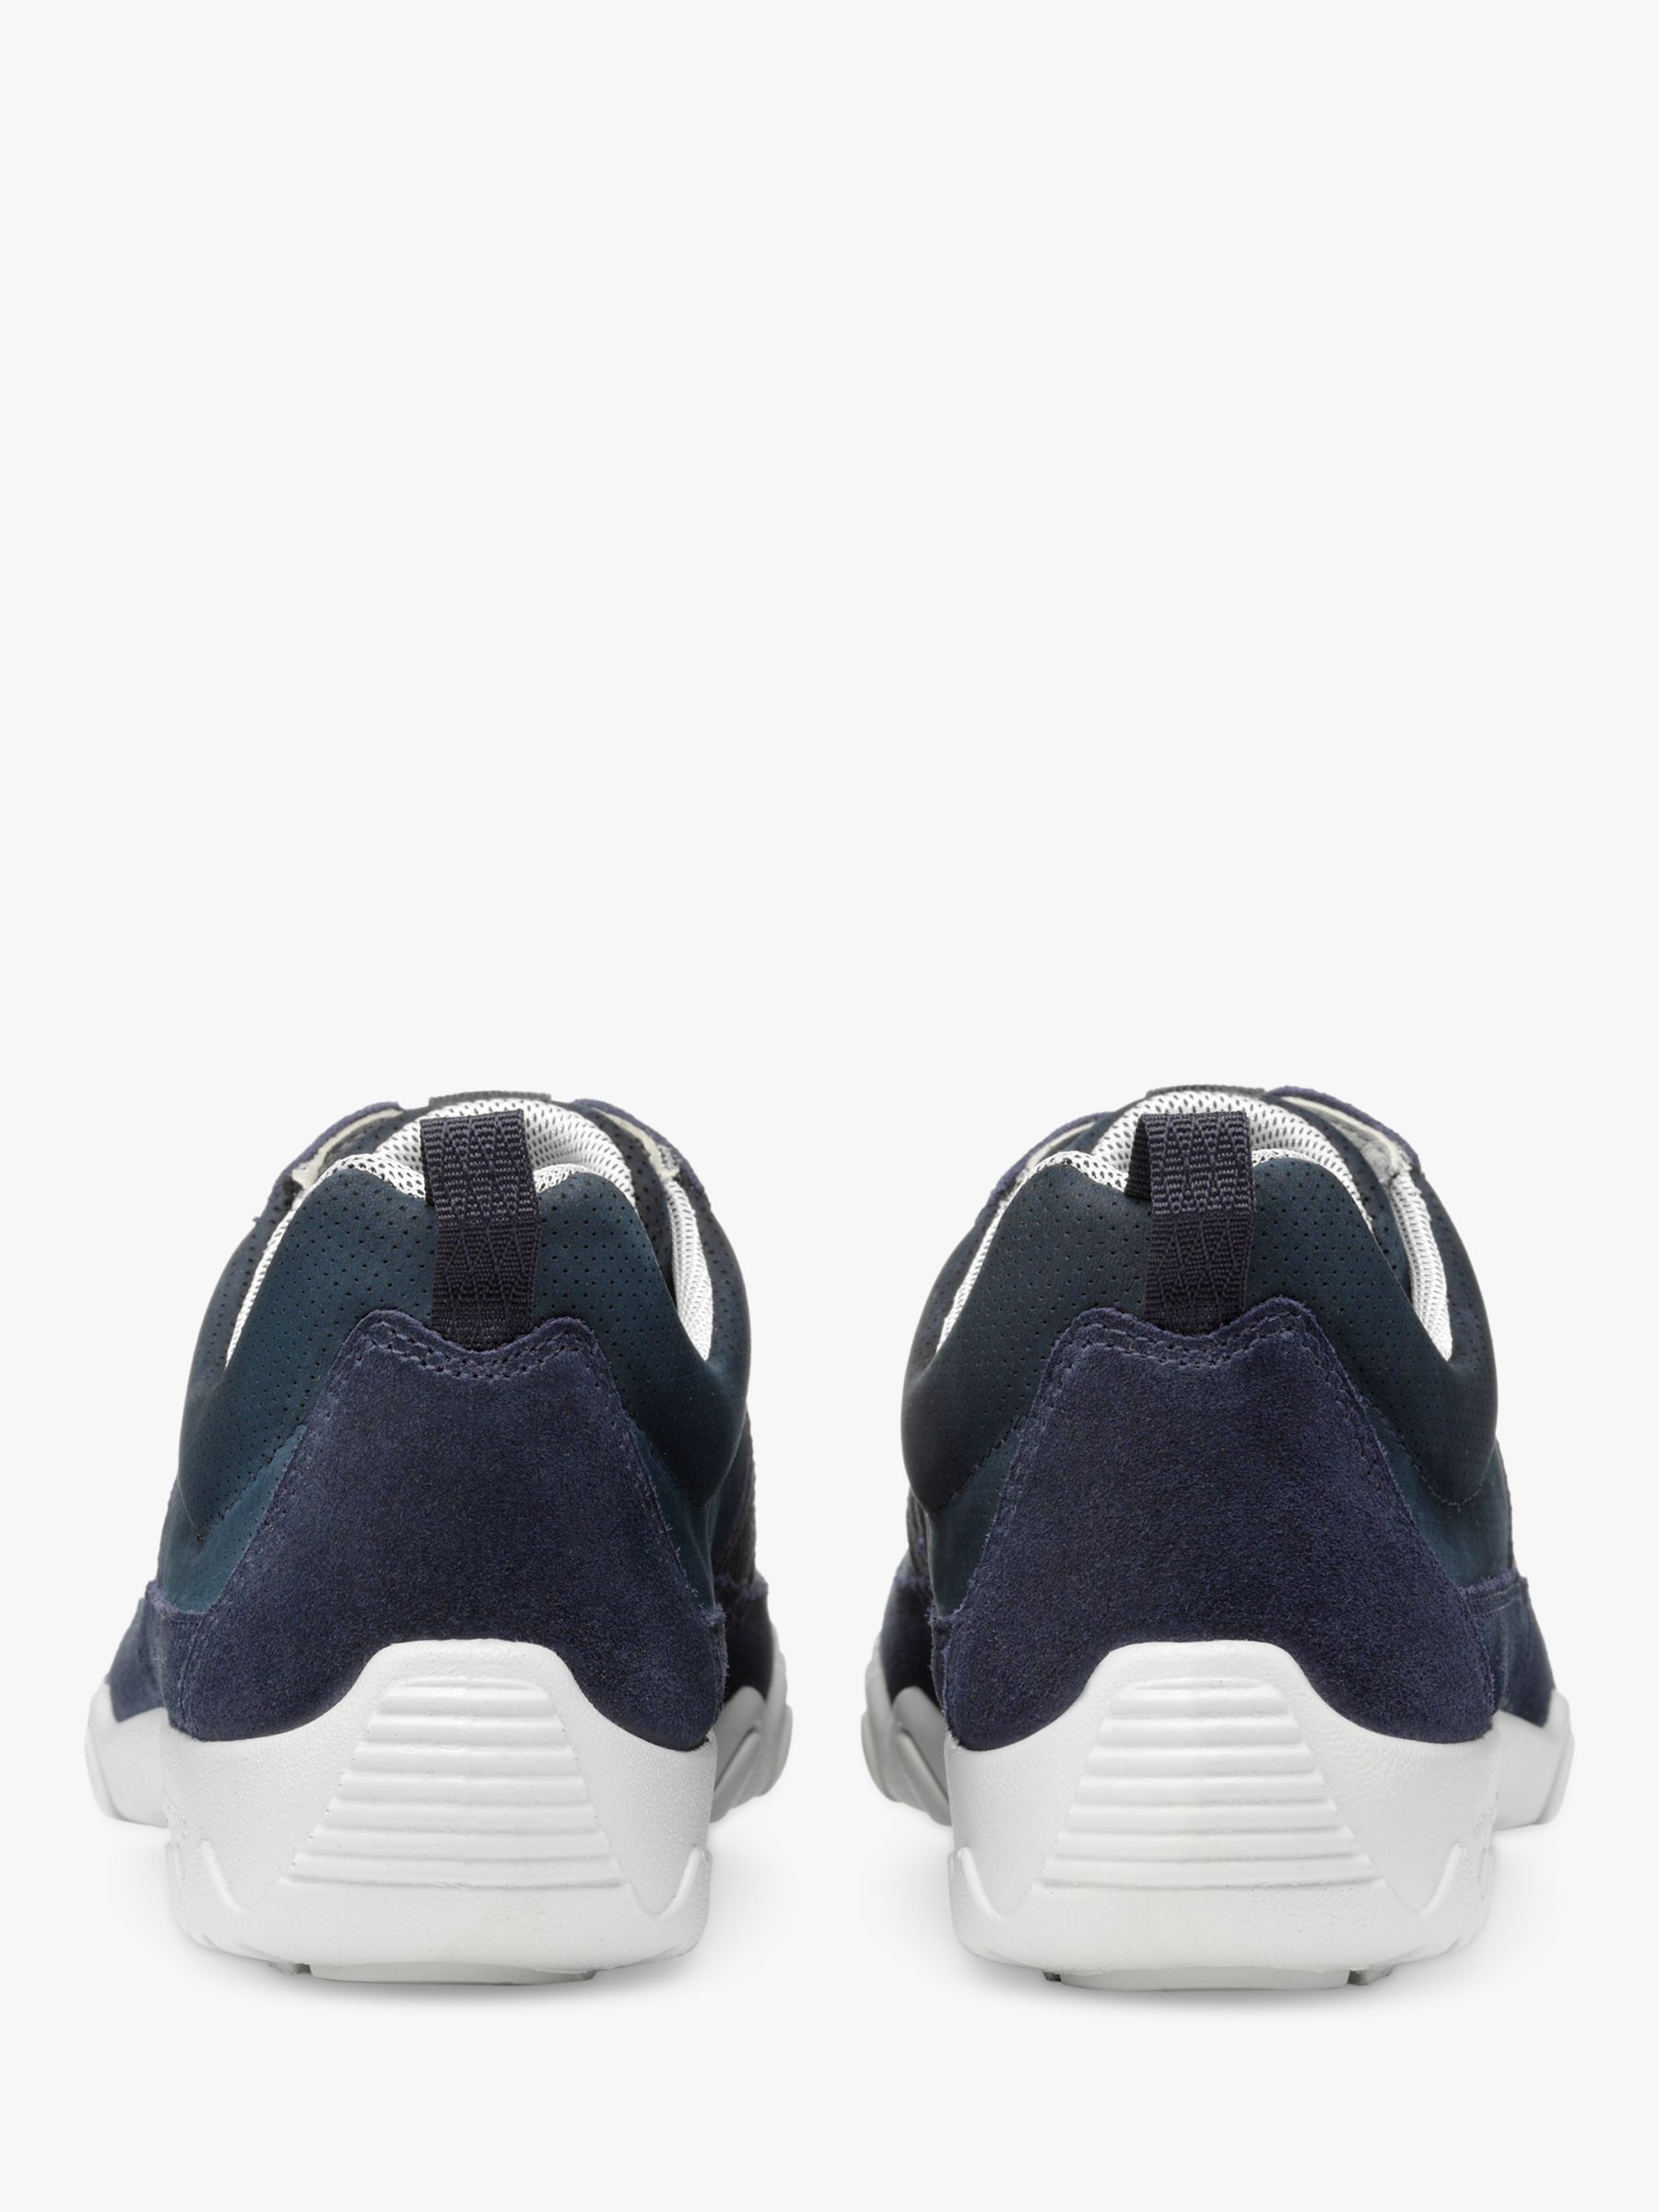 Buy Hotter Leanne II Extra Wide Fit Suede and Nubuck Trainers, Navy Online at johnlewis.com